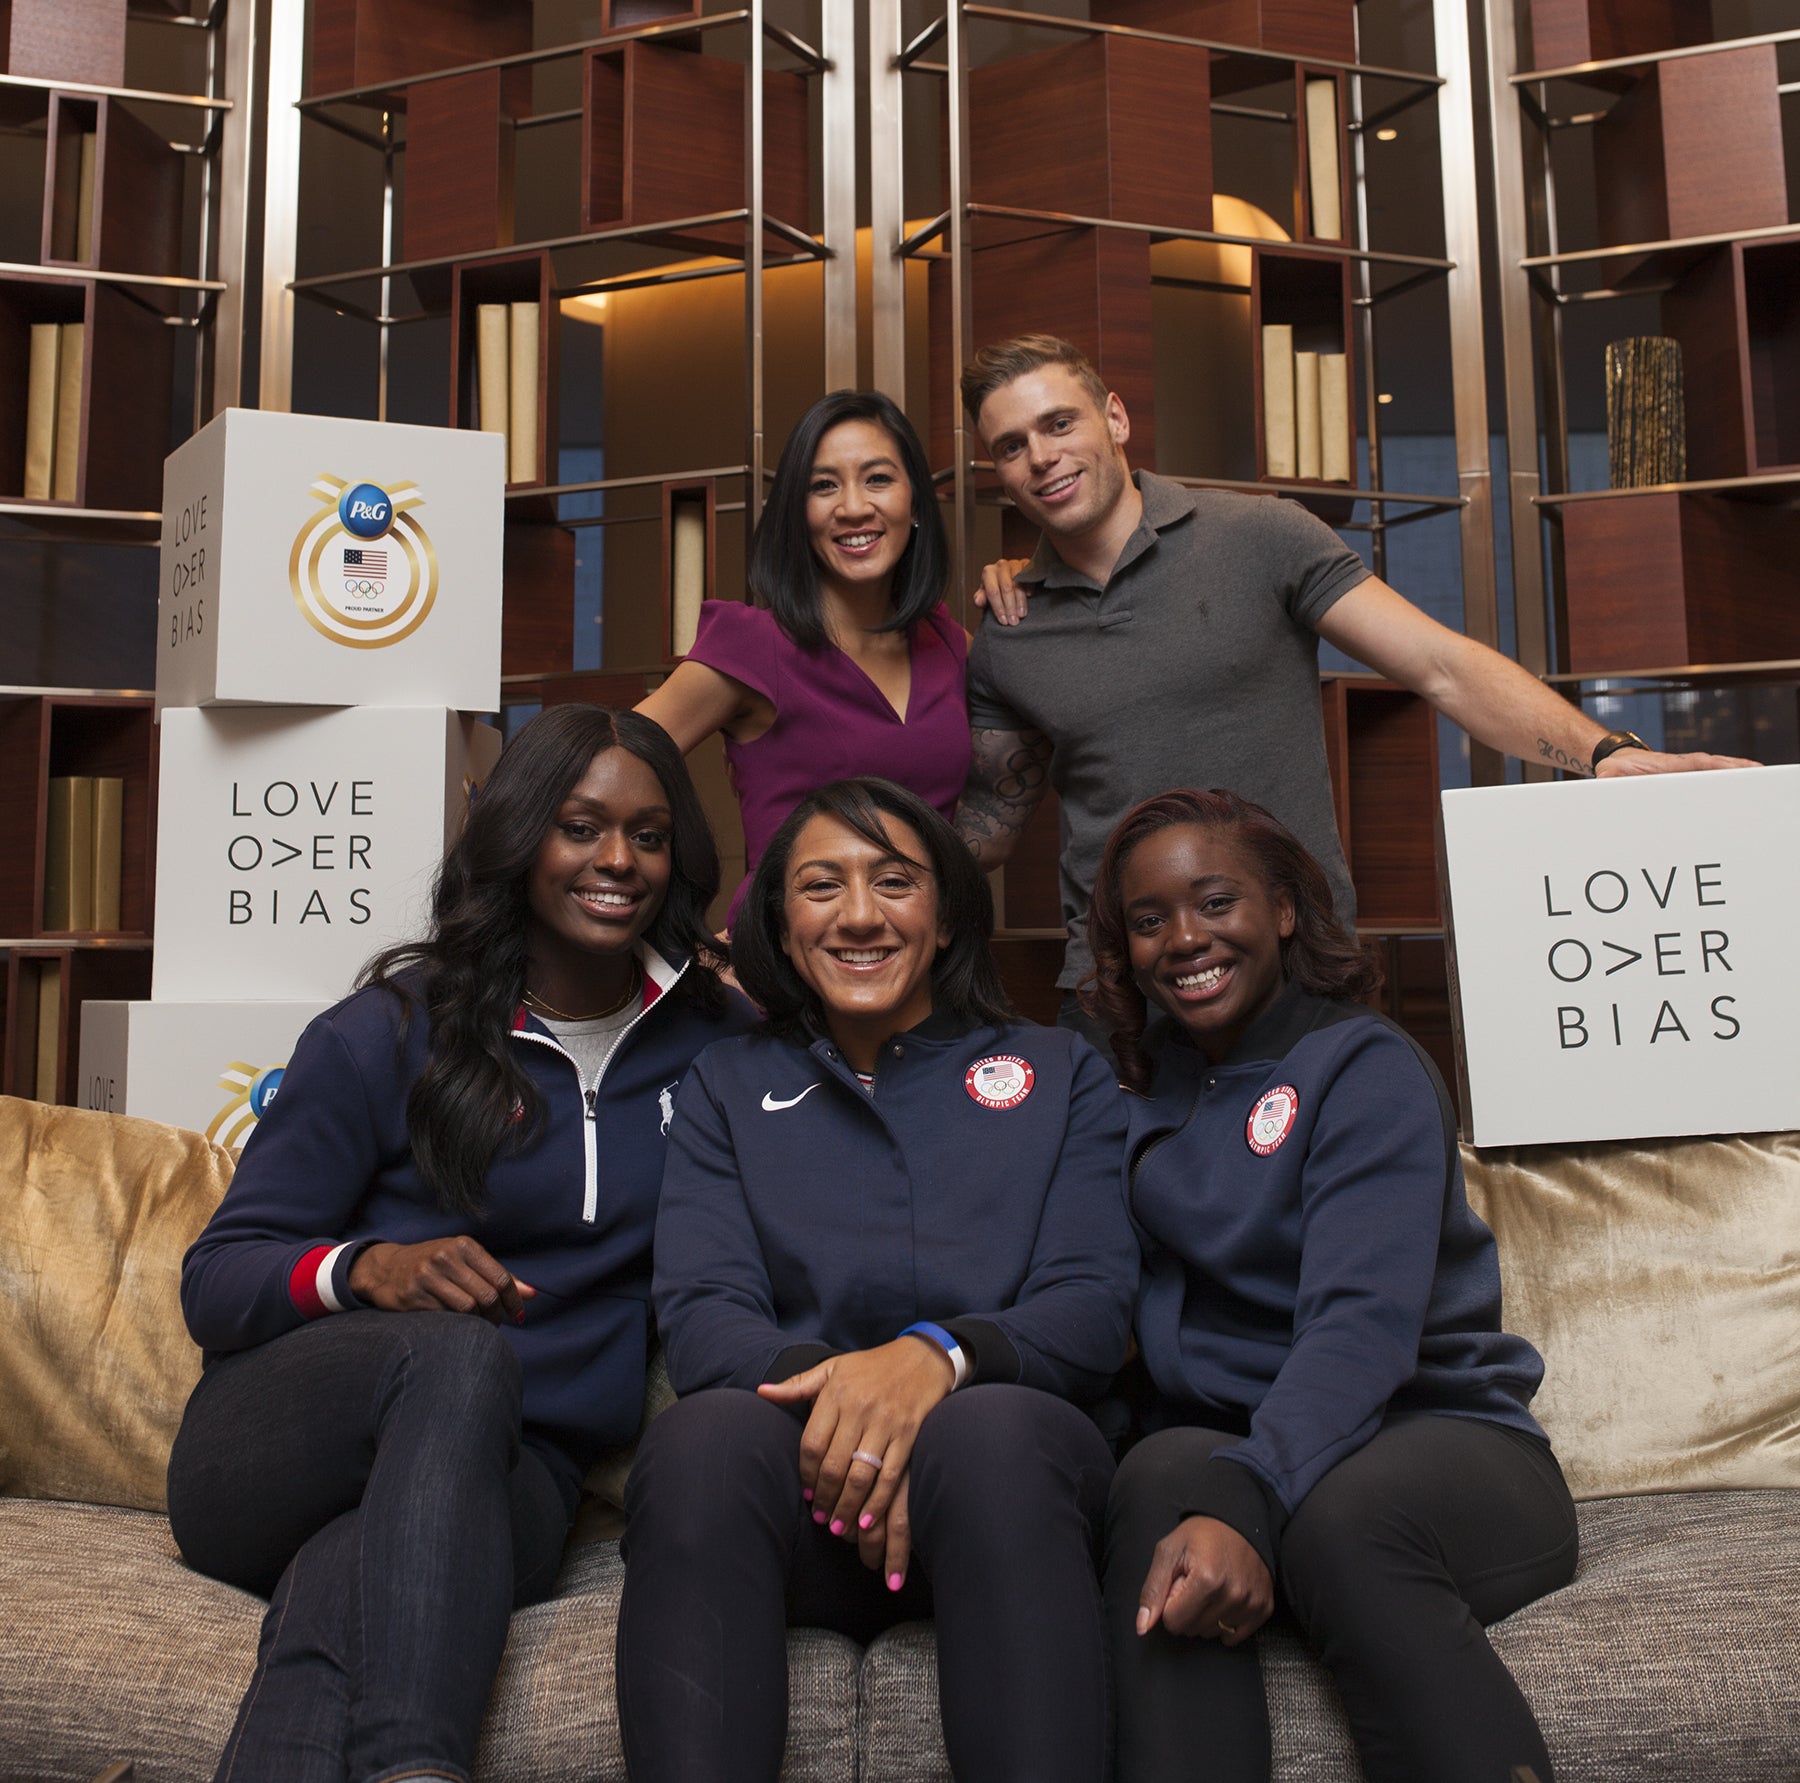 How Olay, Pantene & P&G Brands Work To Fight Bias, Bullying & Prejudices With Love Over Bias / Thank you, Mom Campaign Featuring Olympic Athletes, PyeongChang 2018